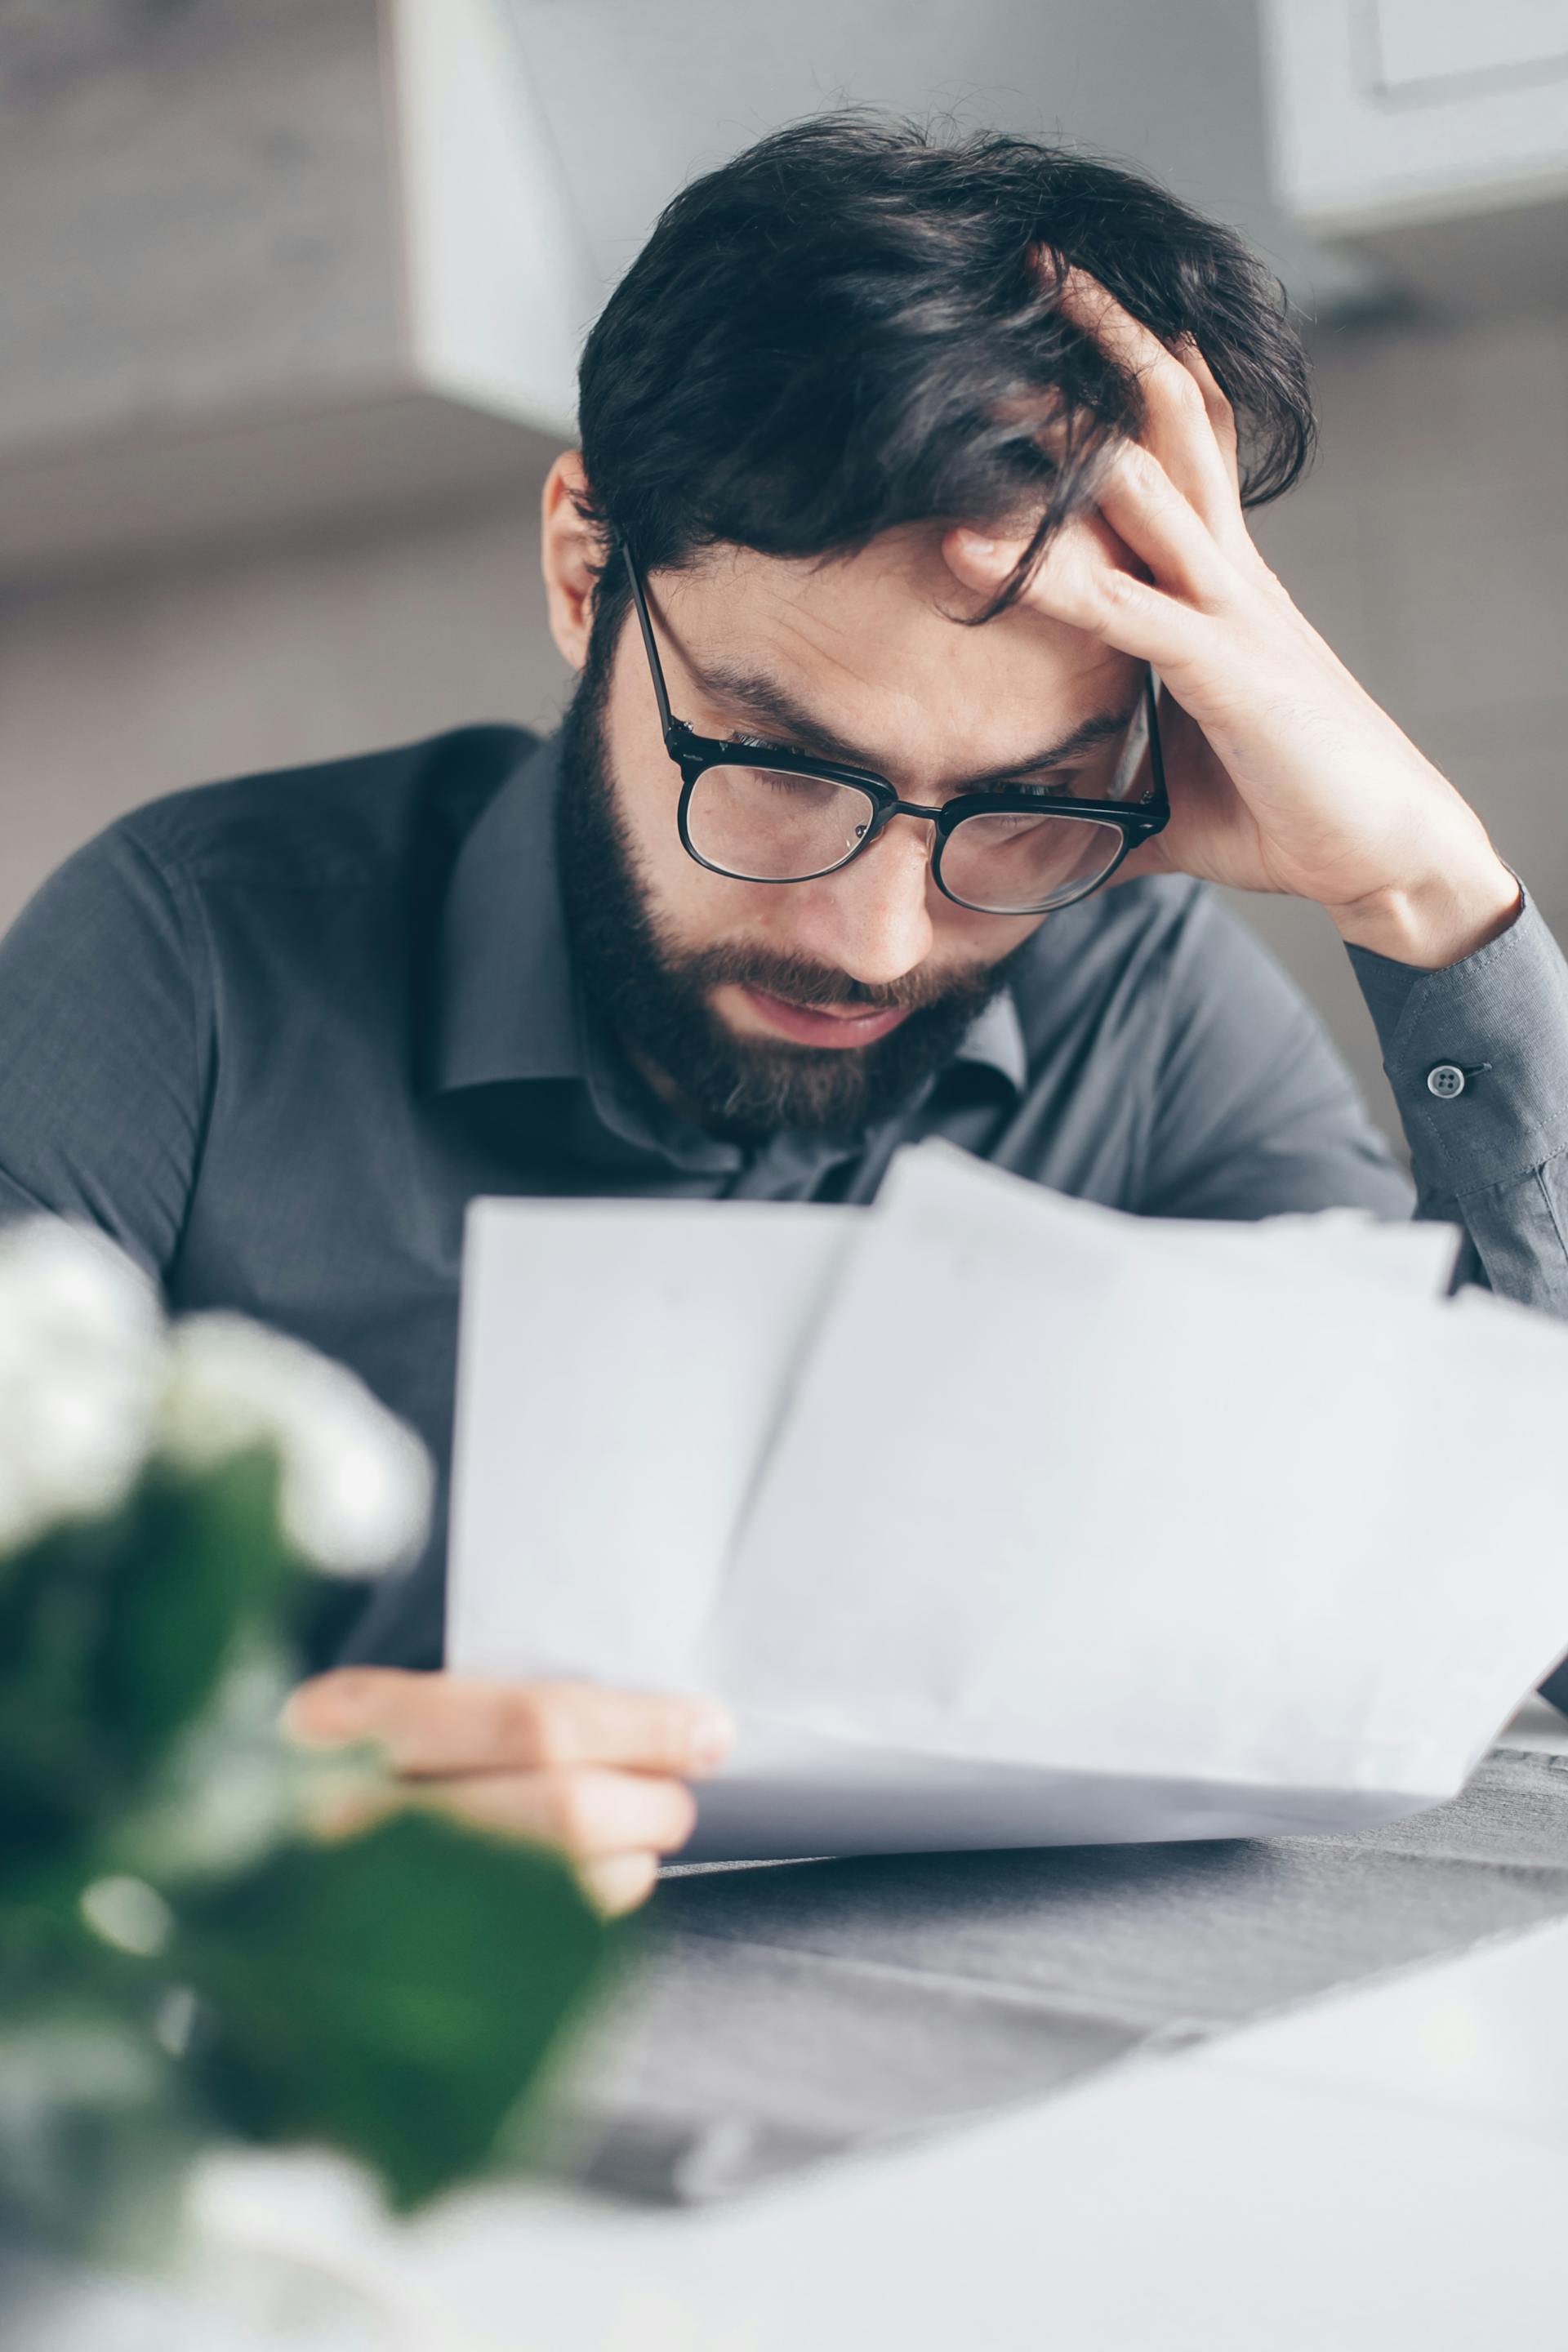 A man looking shocked while reading the documents in his hand | Source: Pexels